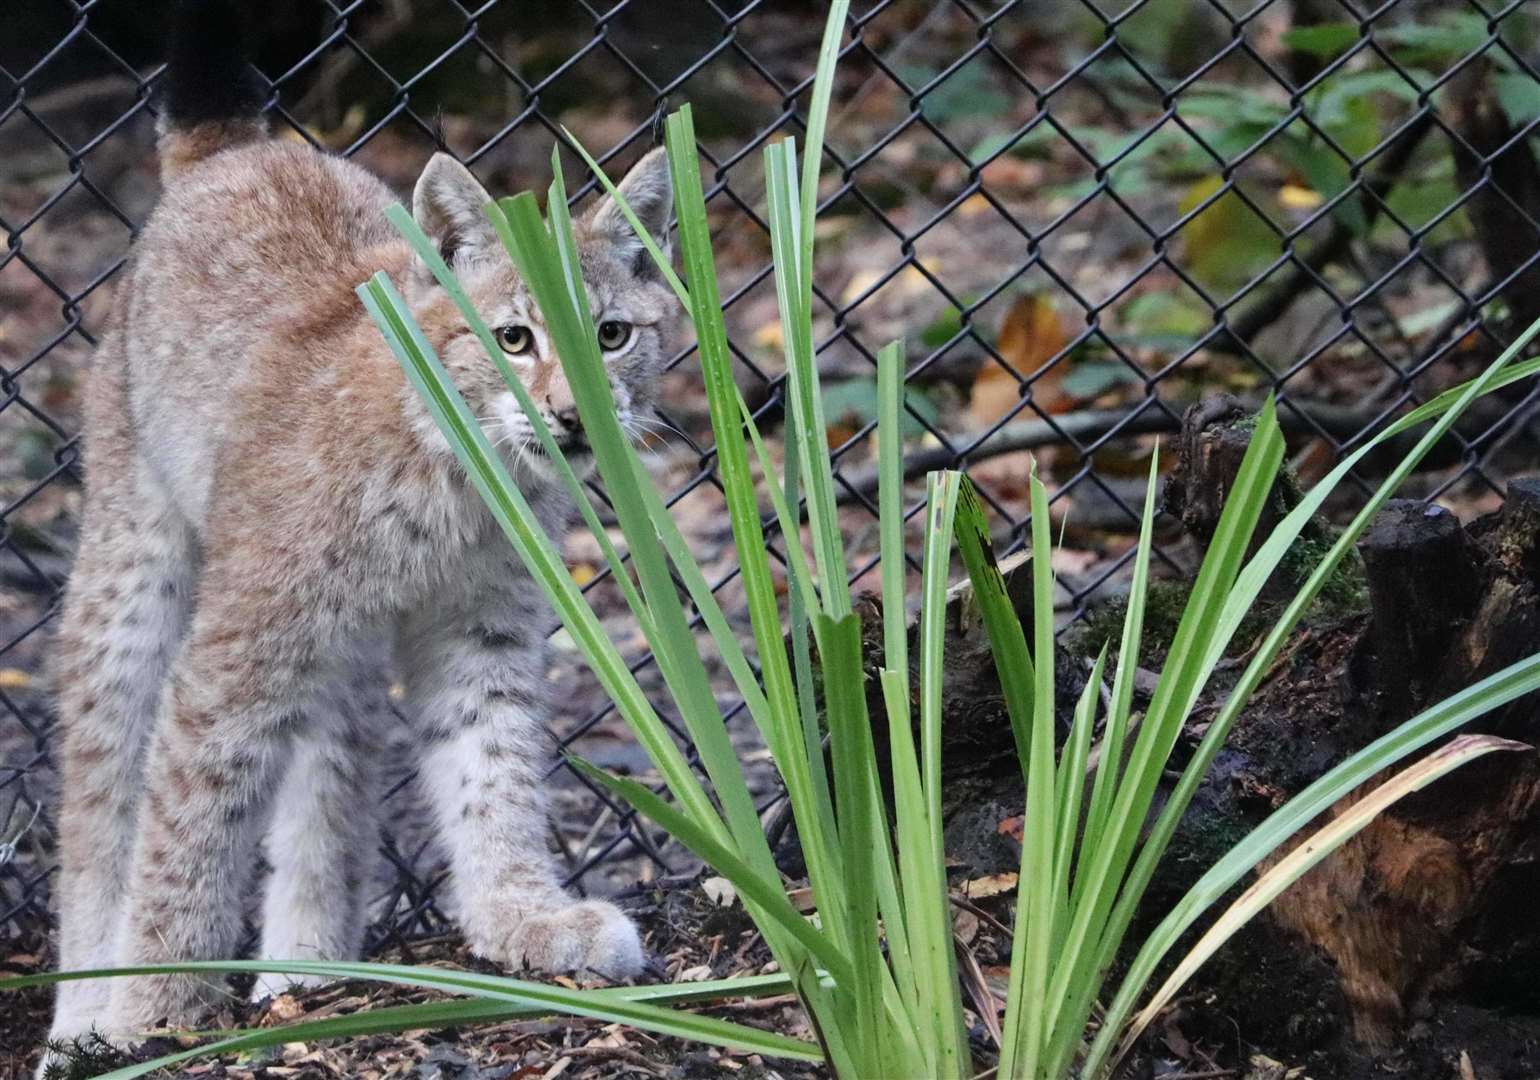 This lynx kitten at Wildwood will be a lot more grown up now